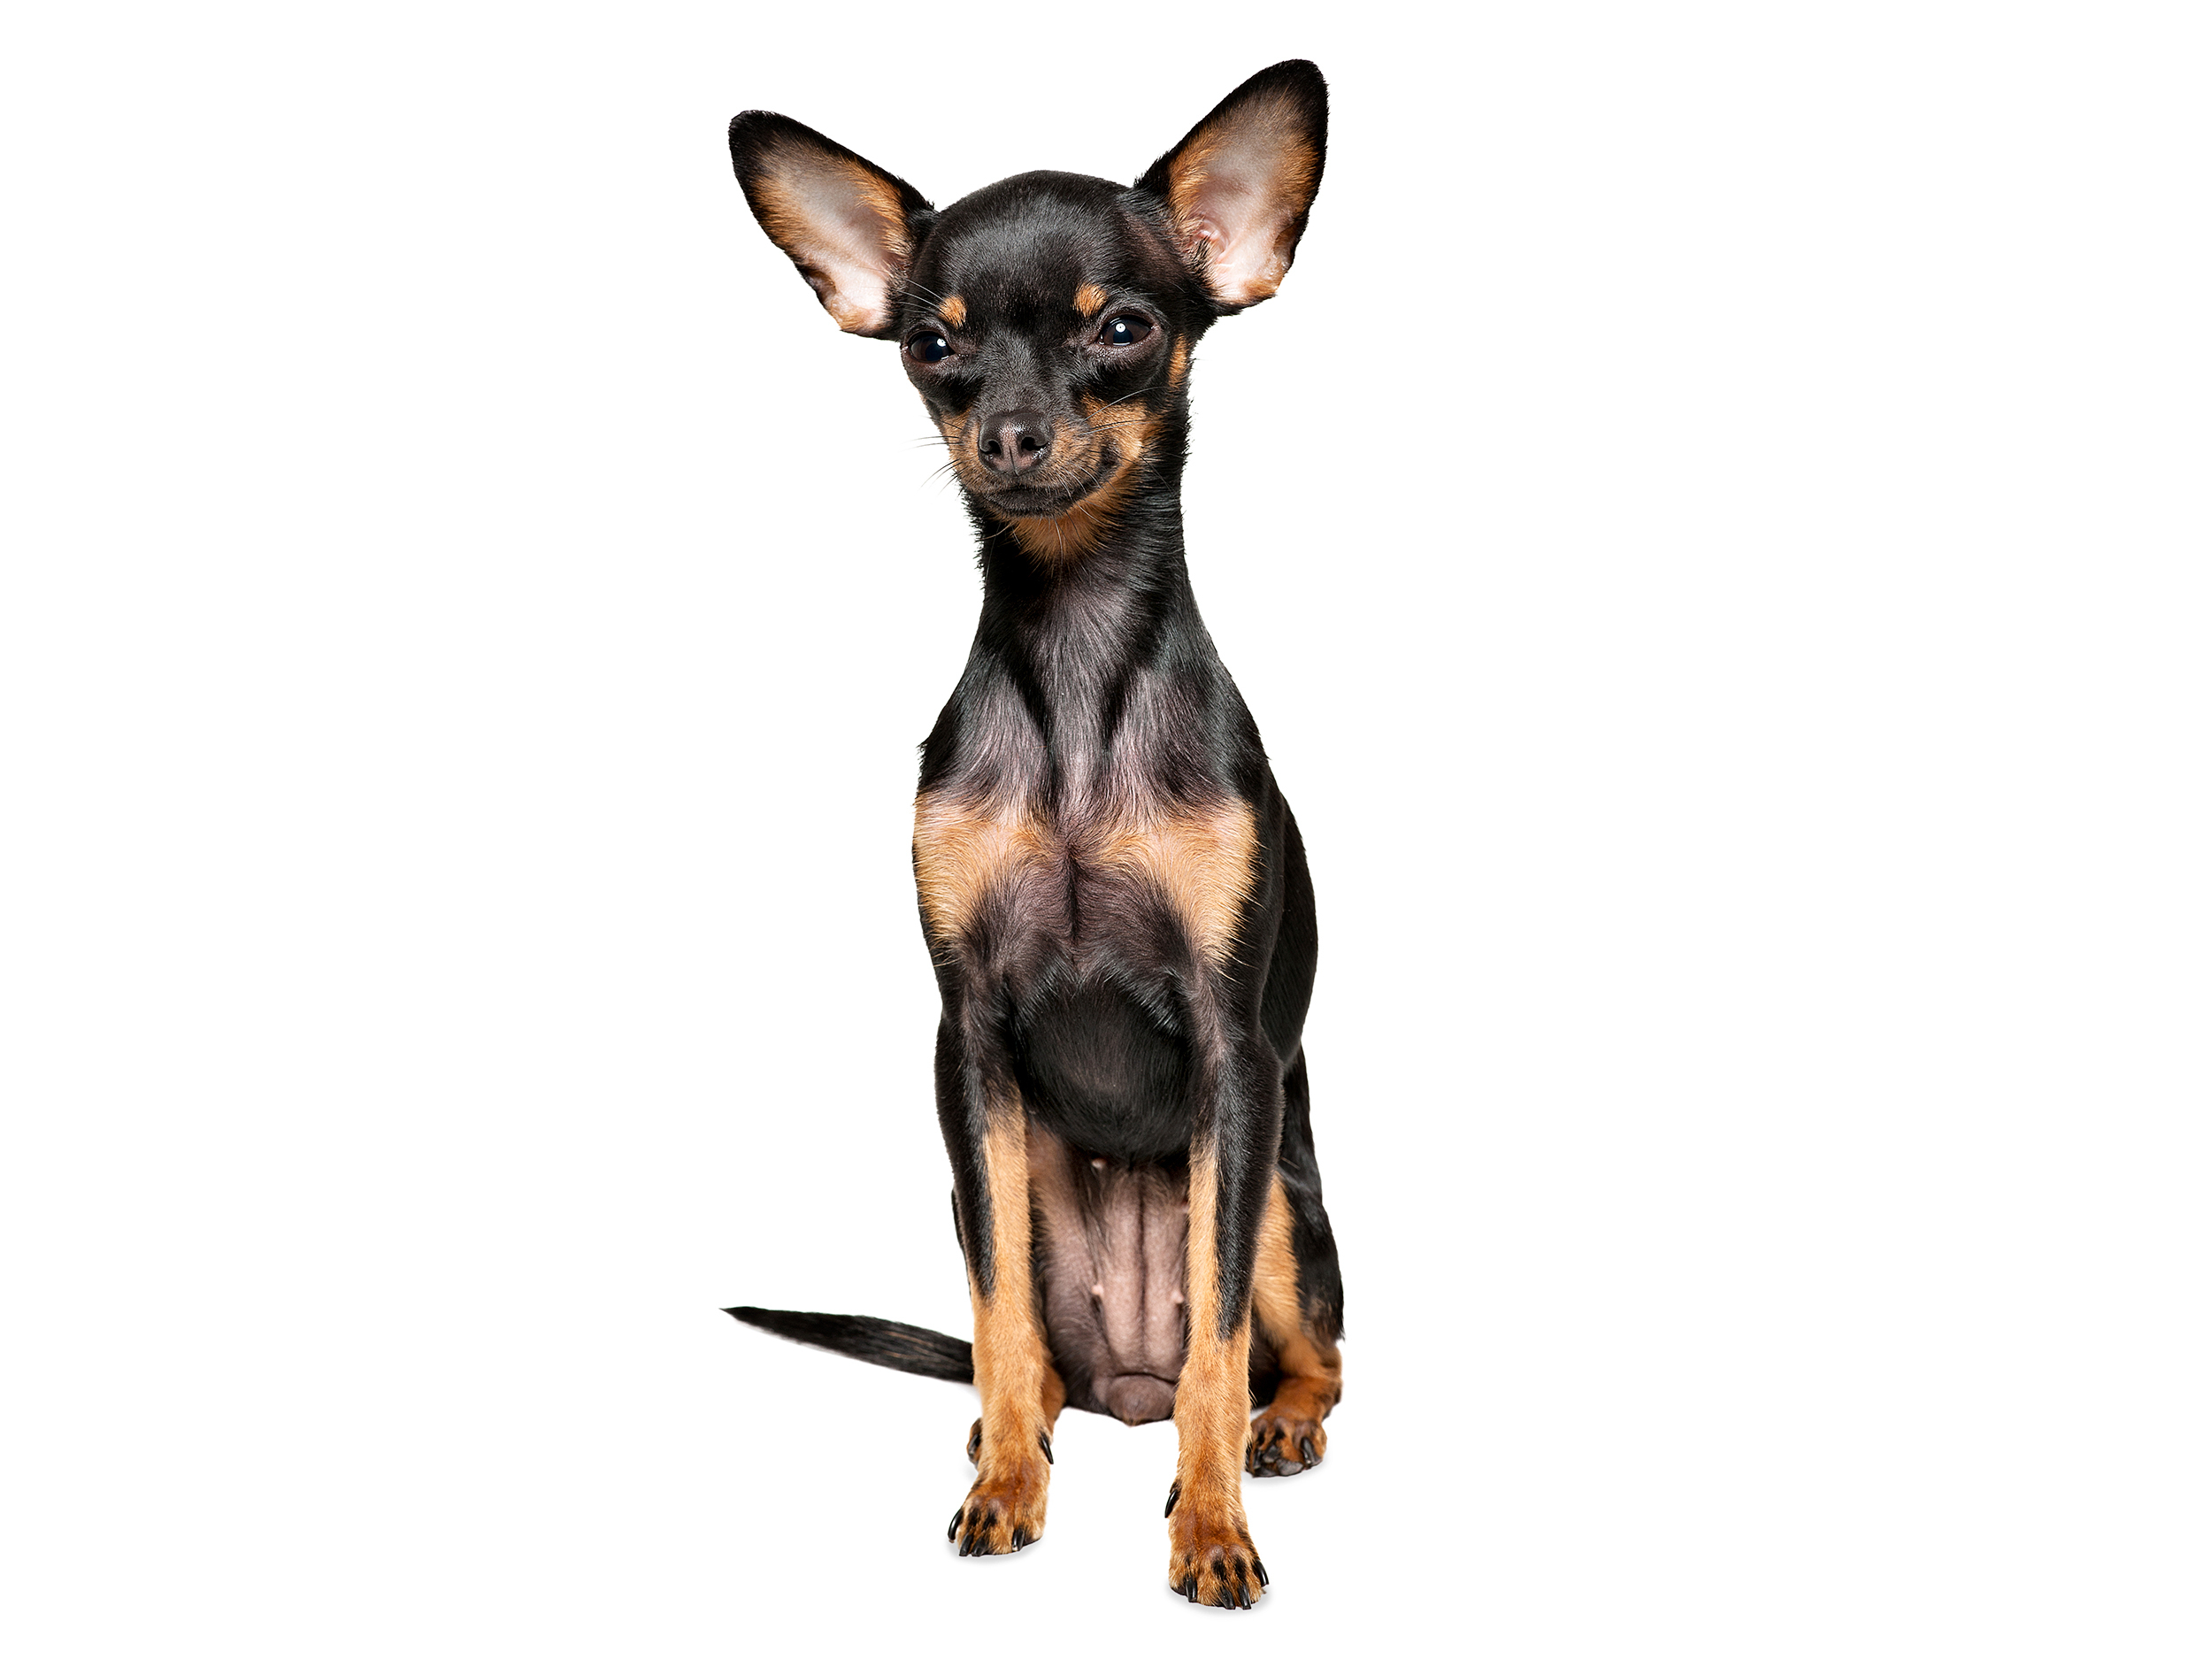 English toy terrier black and tan black and white